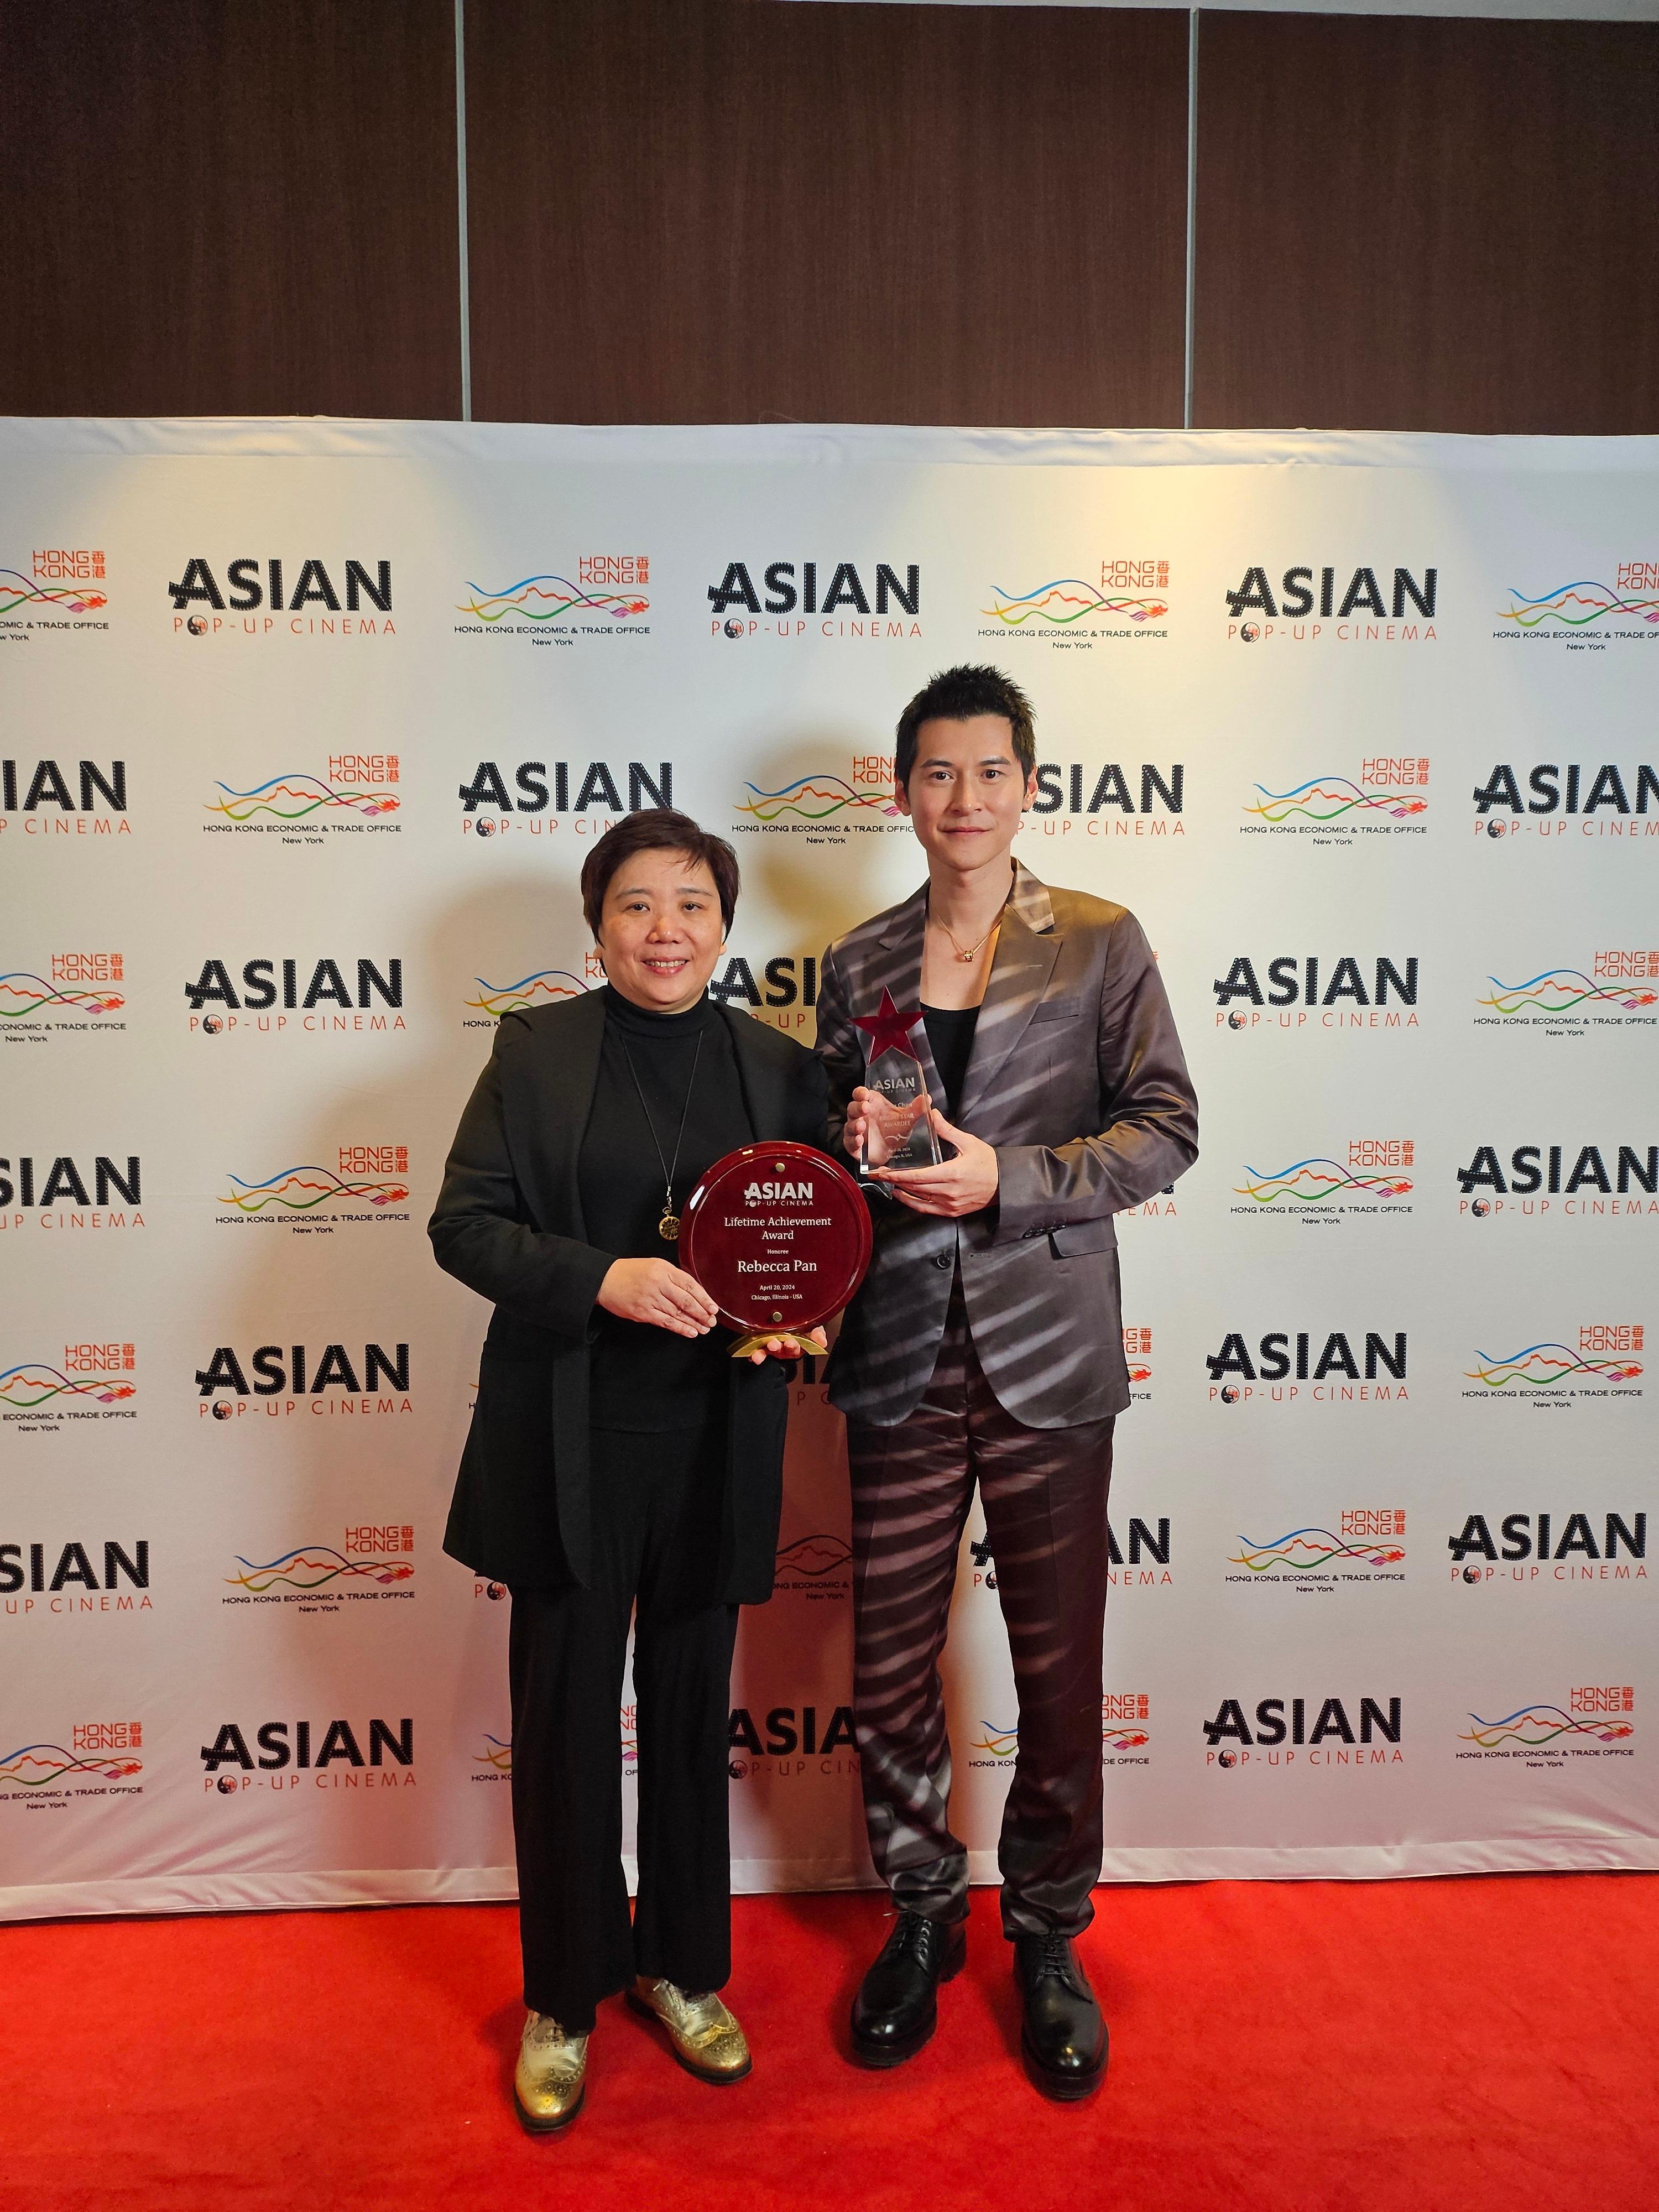 Hong Kong films highlighted the closing weekend (April 19 to 21, Chicago time) of Season 18 of Chicago's Asian Pop-Up Cinema. Photo shows the Bright Star Award honouree, actor Carlos Chan (right) with director Isabel Wong, who received the Lifetime Achievement Award on behalf of Rebecca Pan (left), on the closing night on April 20 (Chicago time).